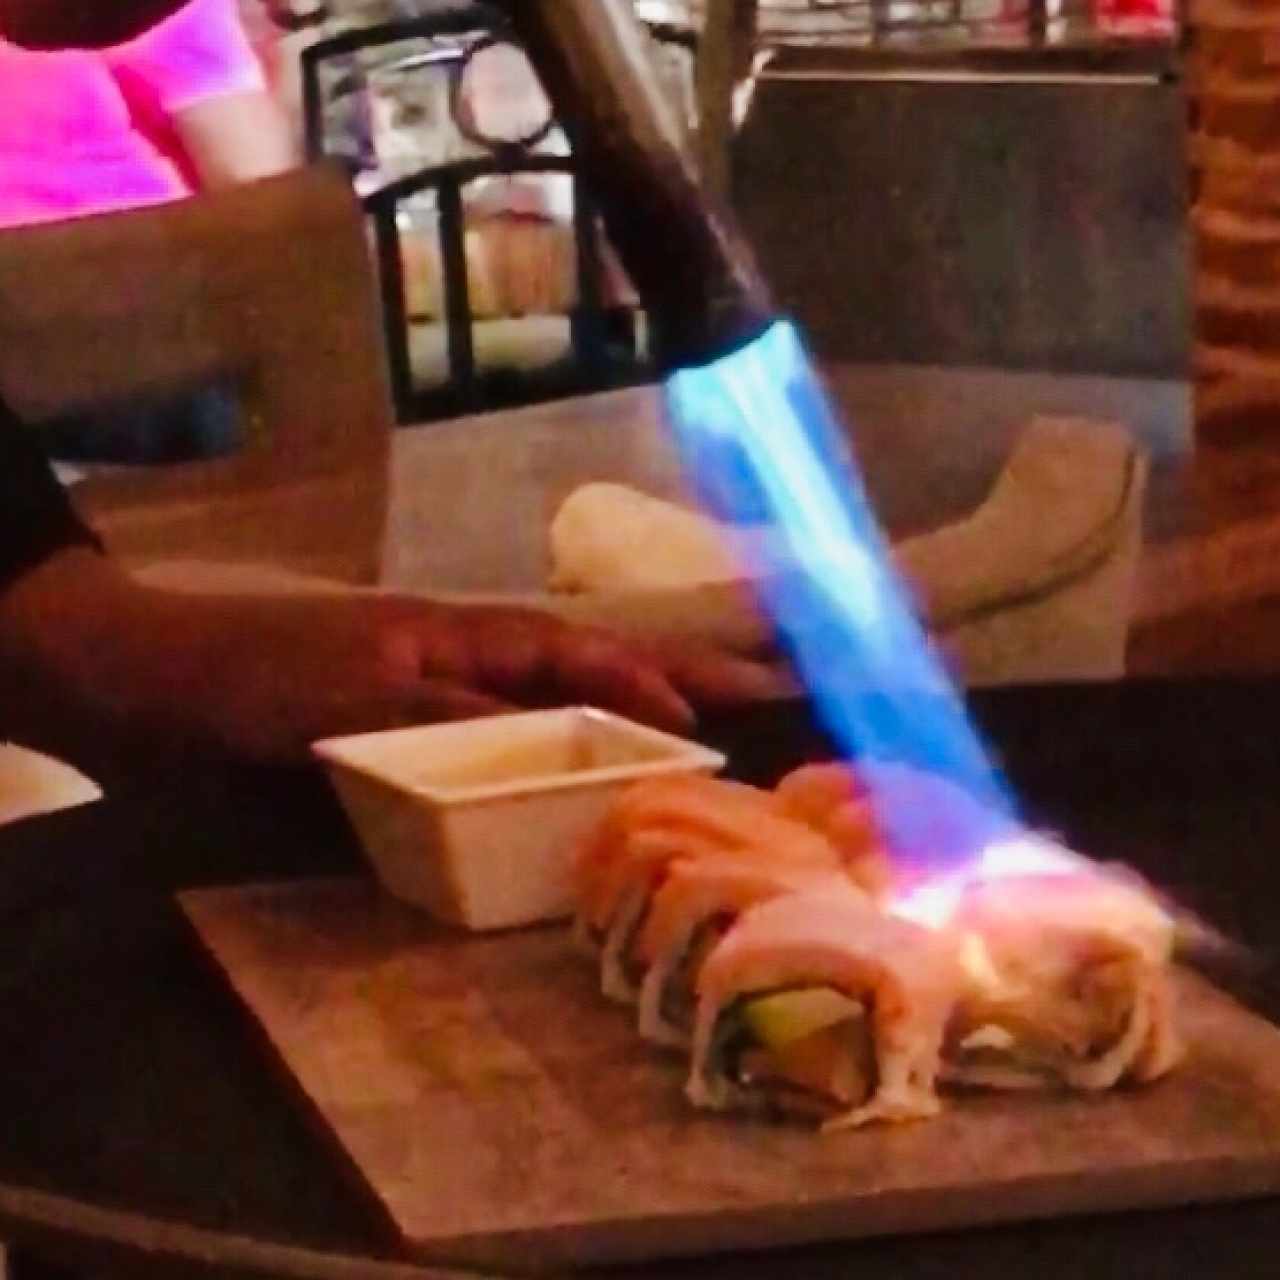 JK Sushis - Spicy Explosion